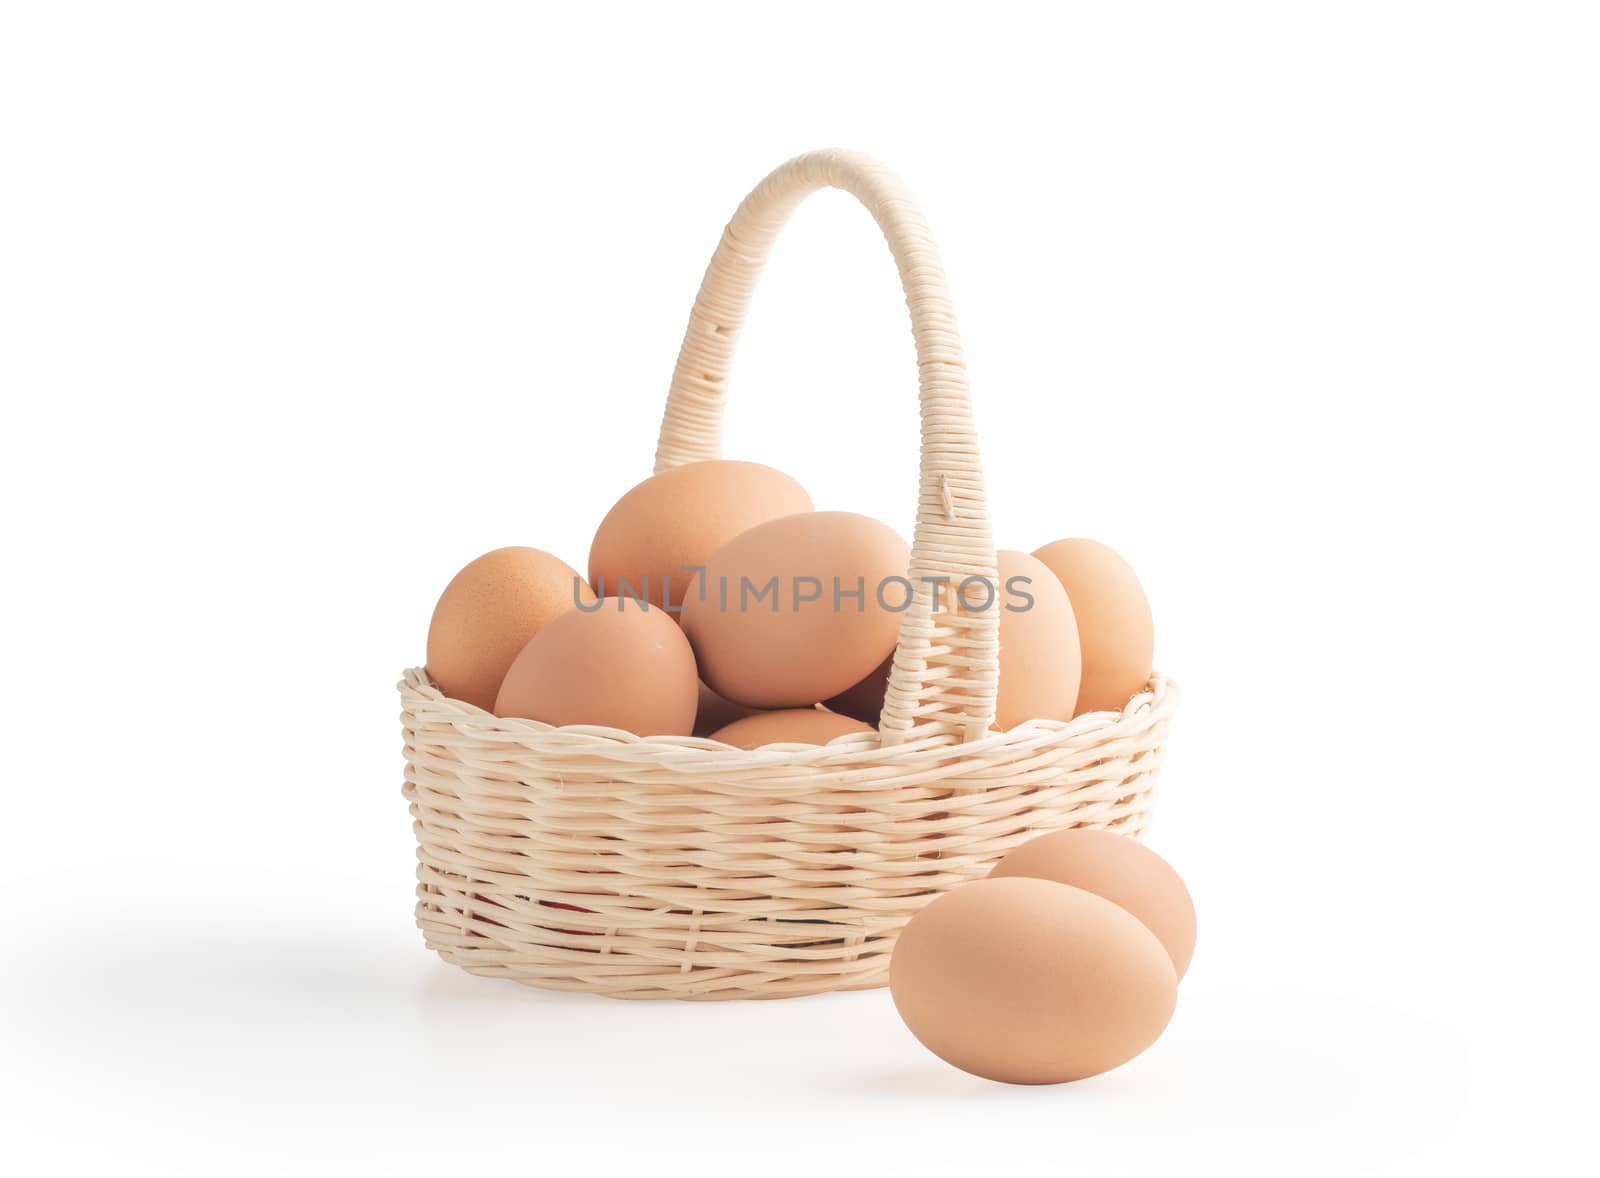 Eggs in the wicker basket isolated on the white backgrounds by Nikkikii